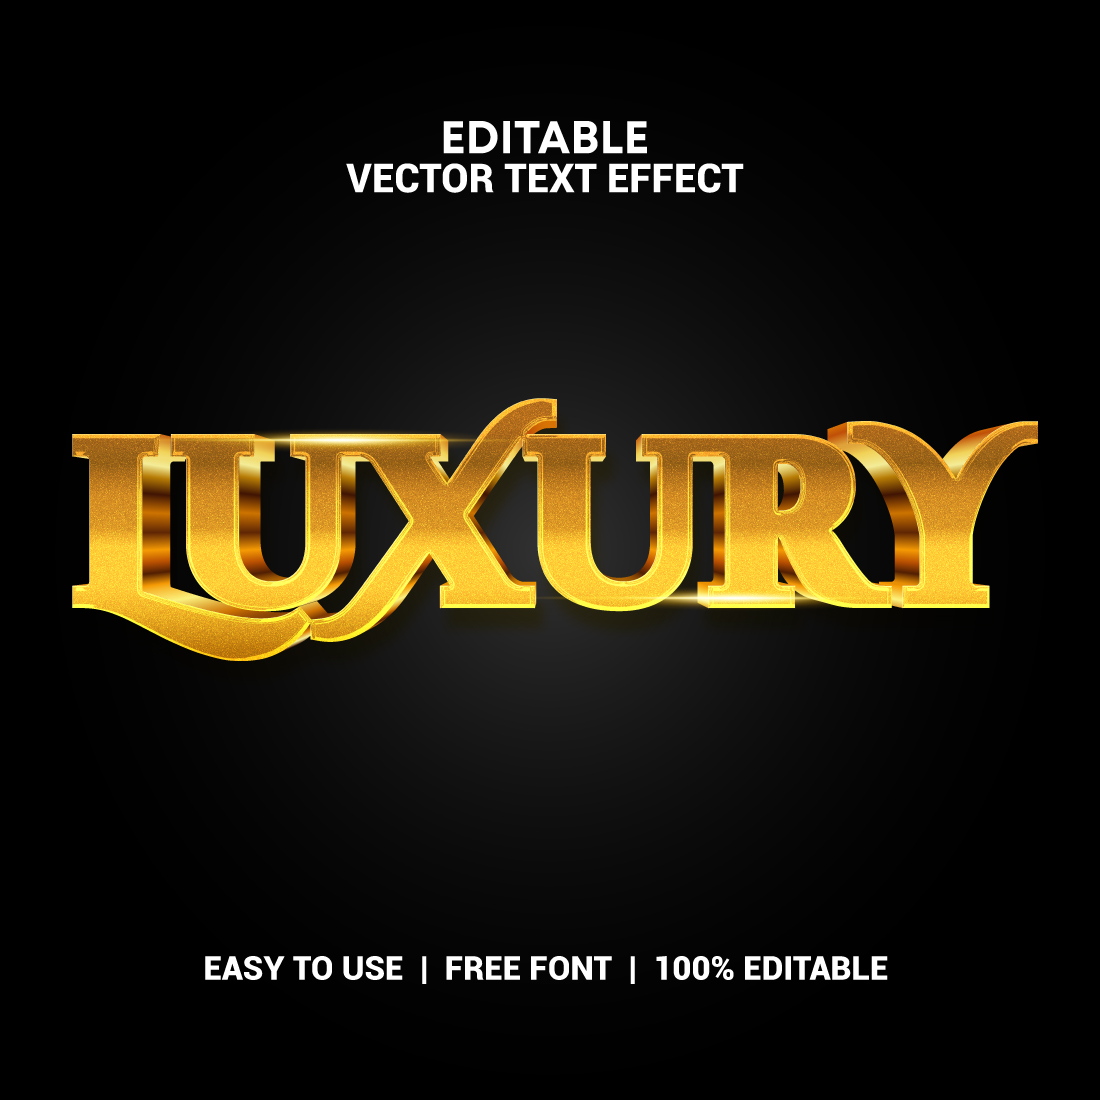 Luxury 3d Text Effect cover image.